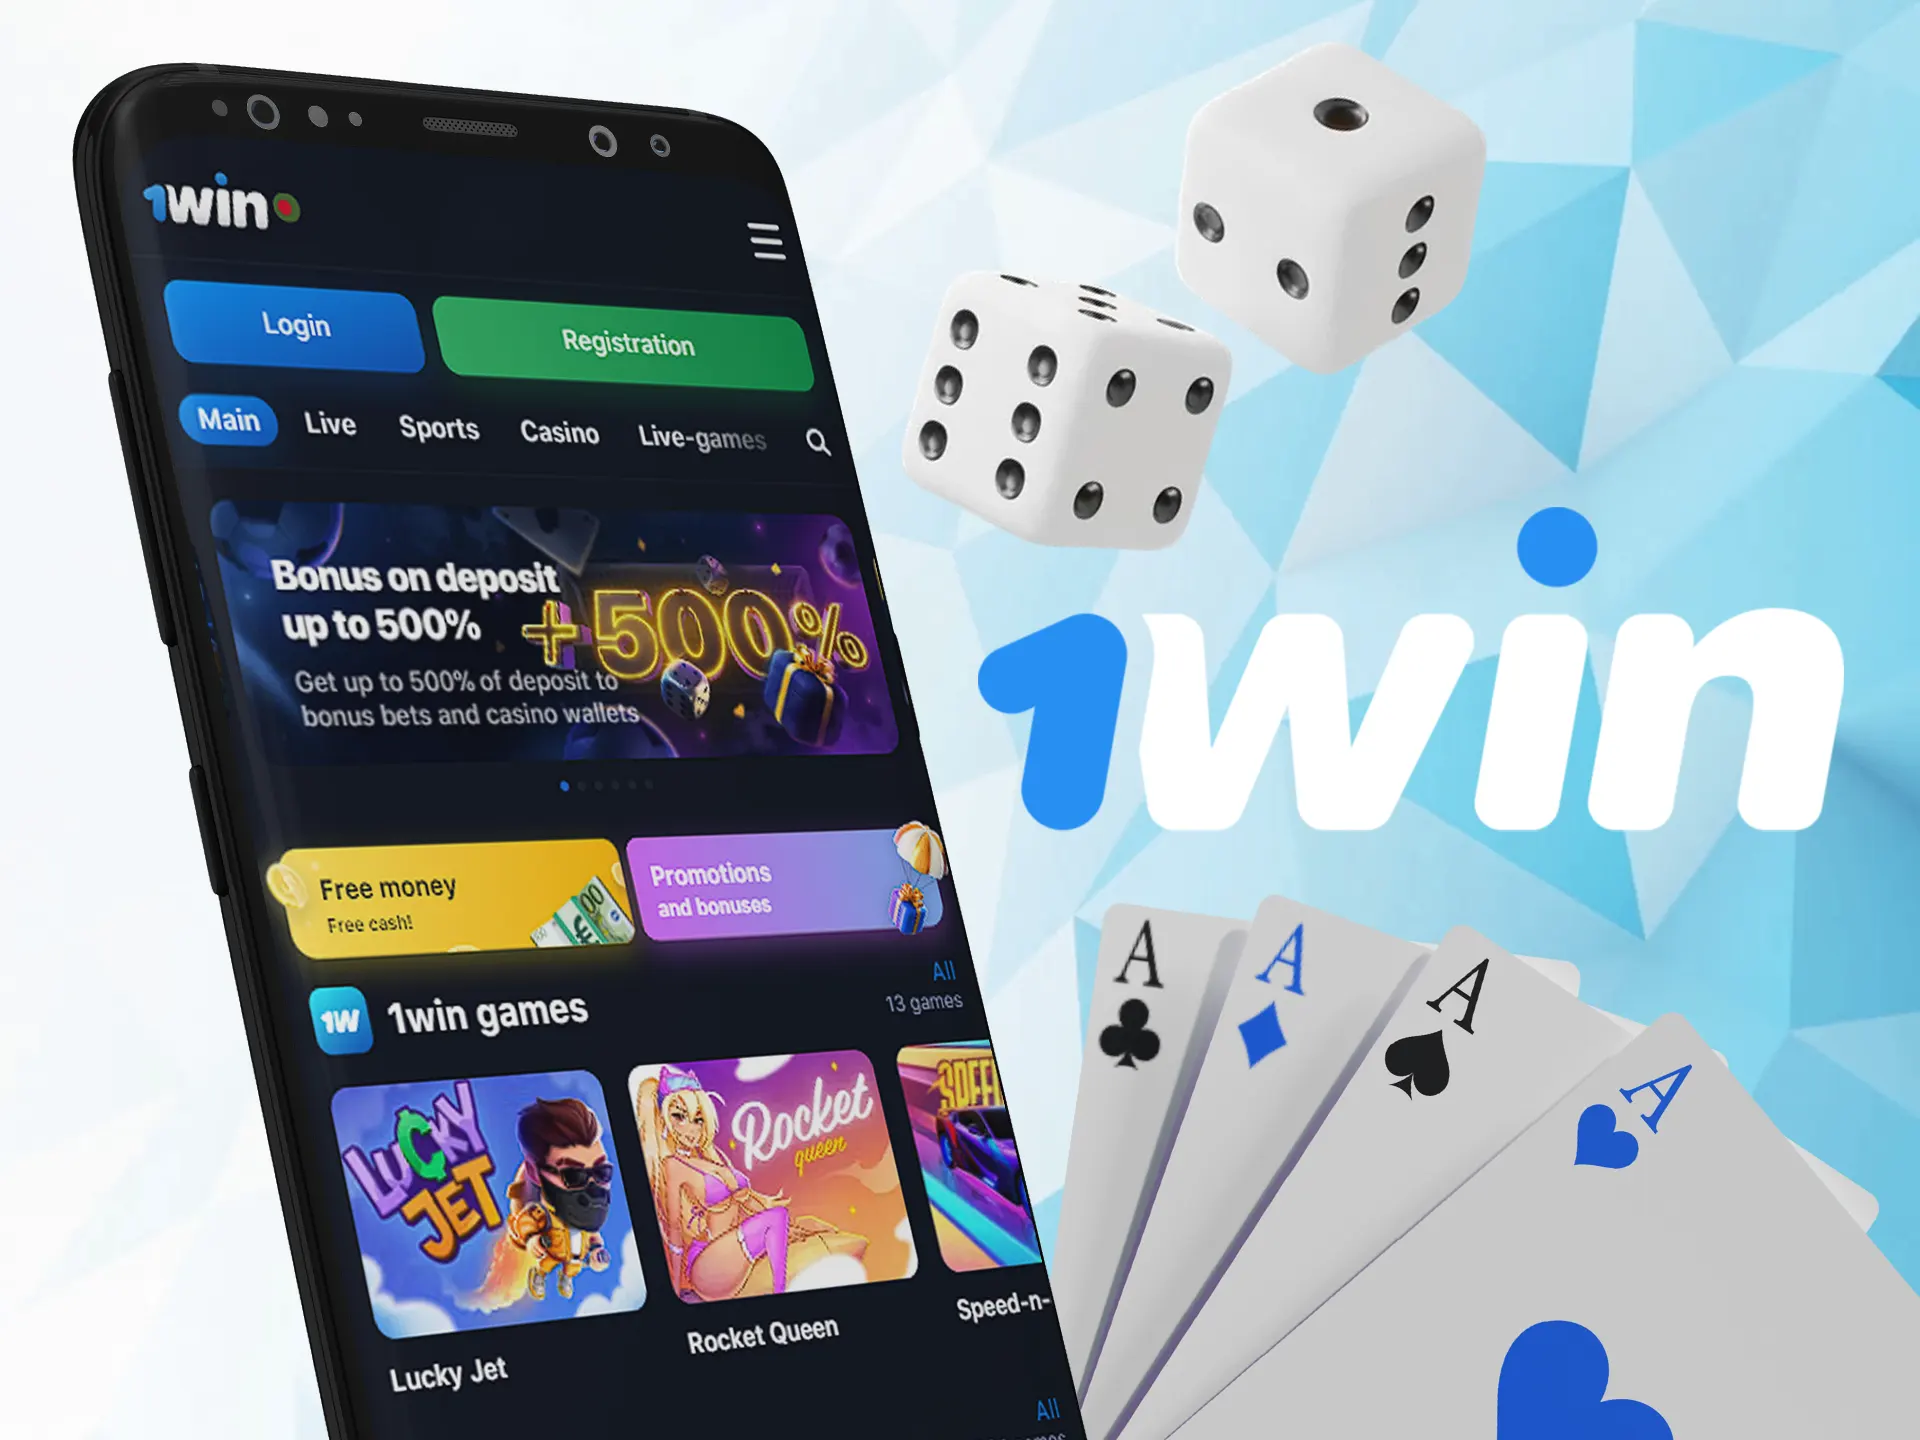 Win more money by playing casino games in the 1win app.